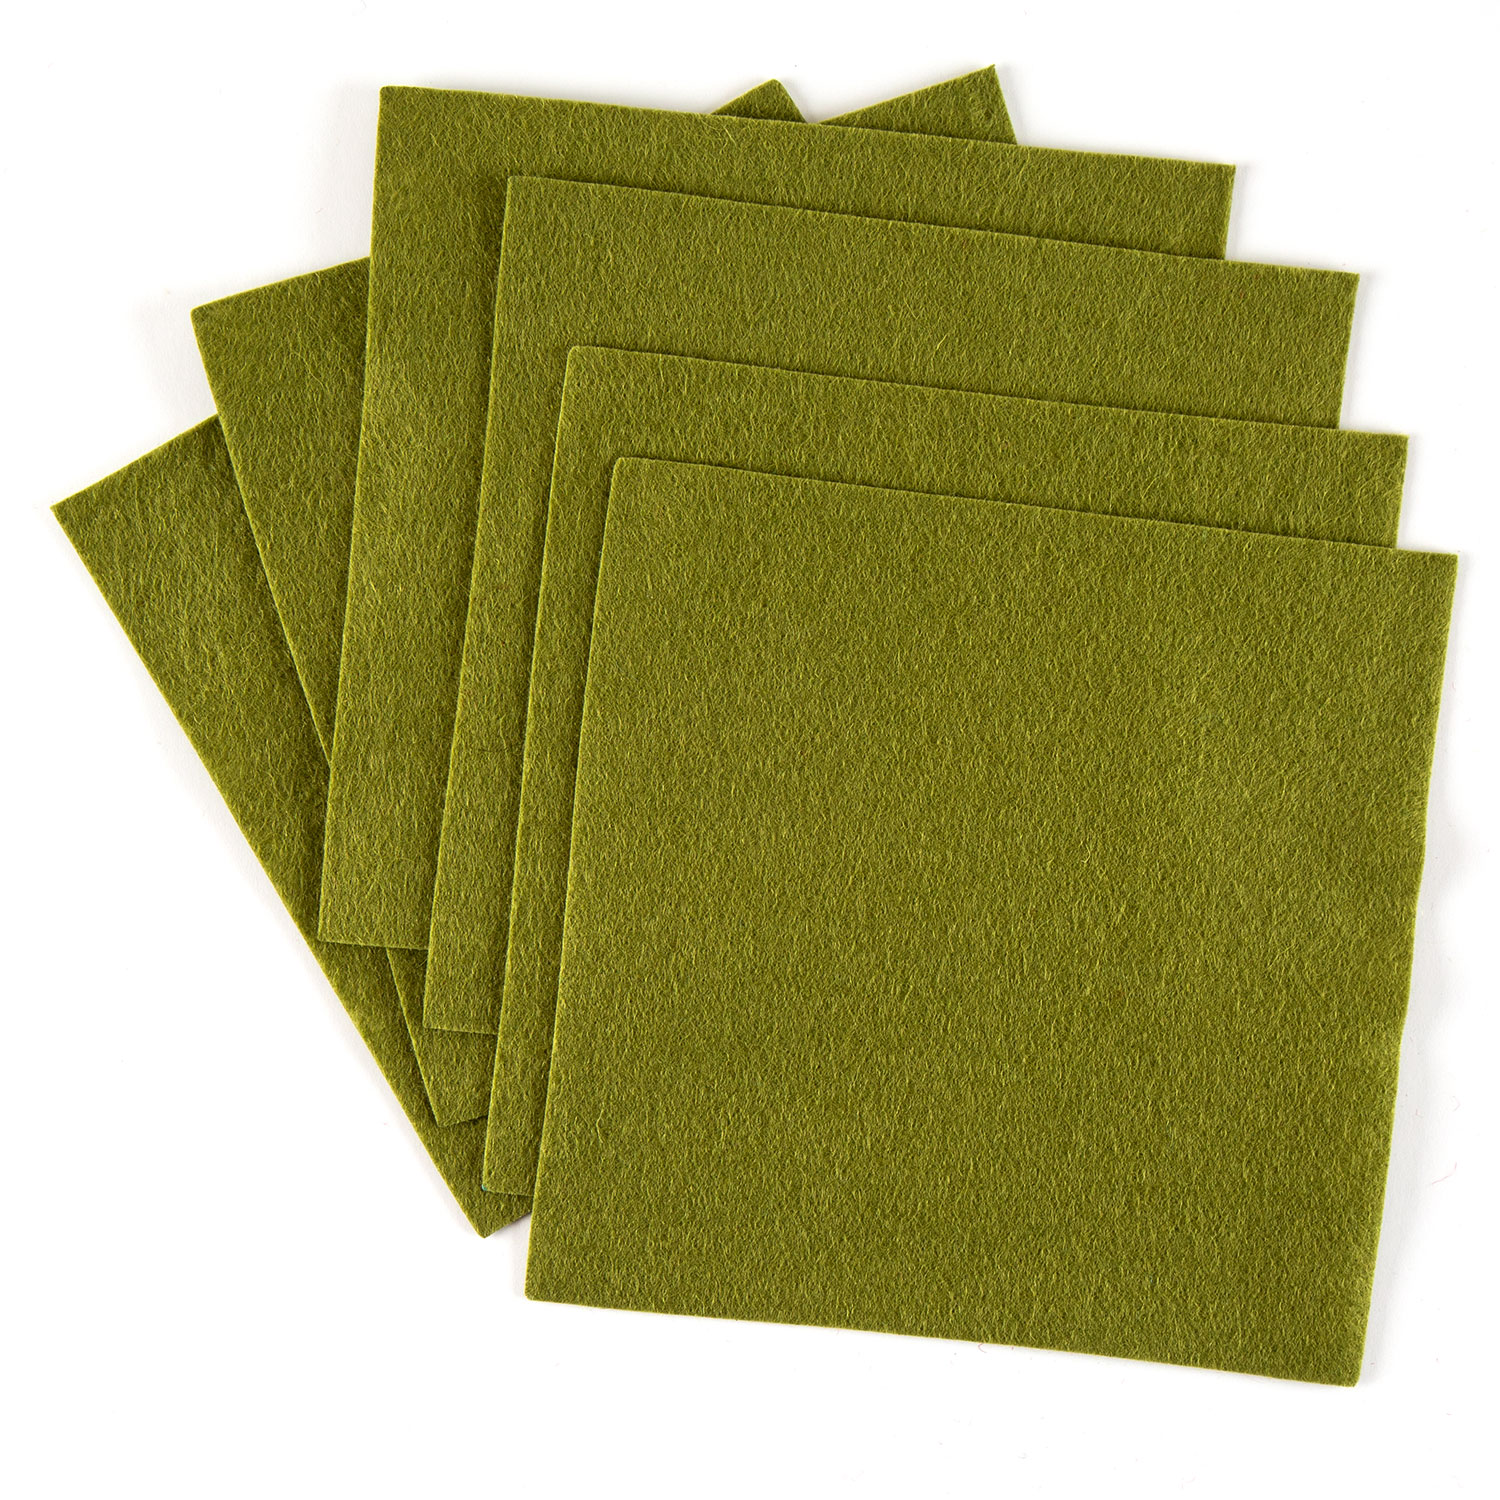 Felt by Clarity Pack of 6 Tile Backers 6x6" Non Adhesive Felt Pick N Mix - Pick any 2 - Olive Green